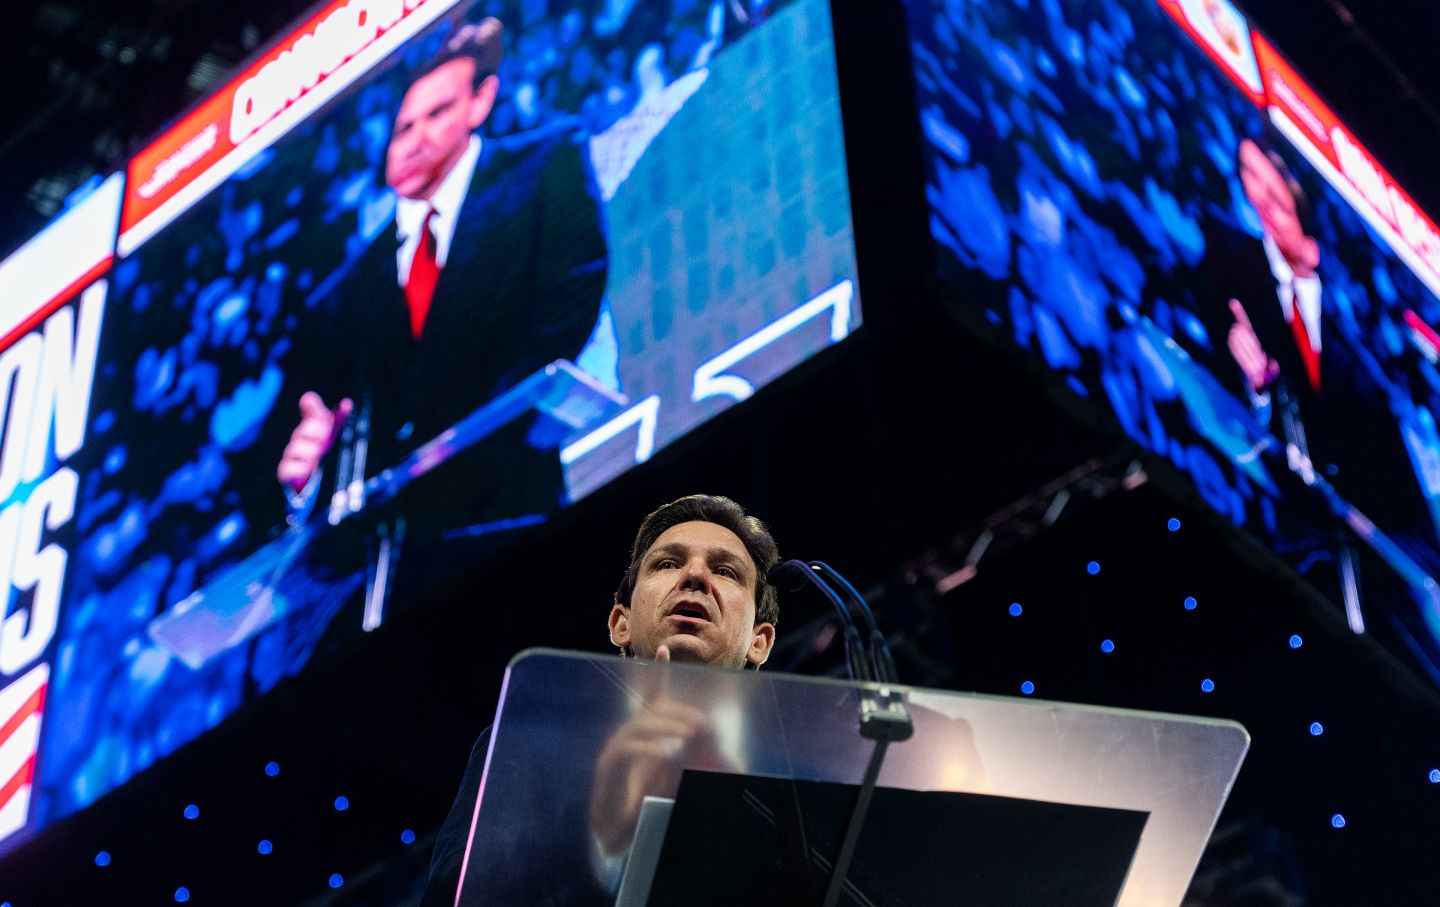 Florida Governor Ron DeSantis at a podium, seen from below, with his image on a large TV screen above him.